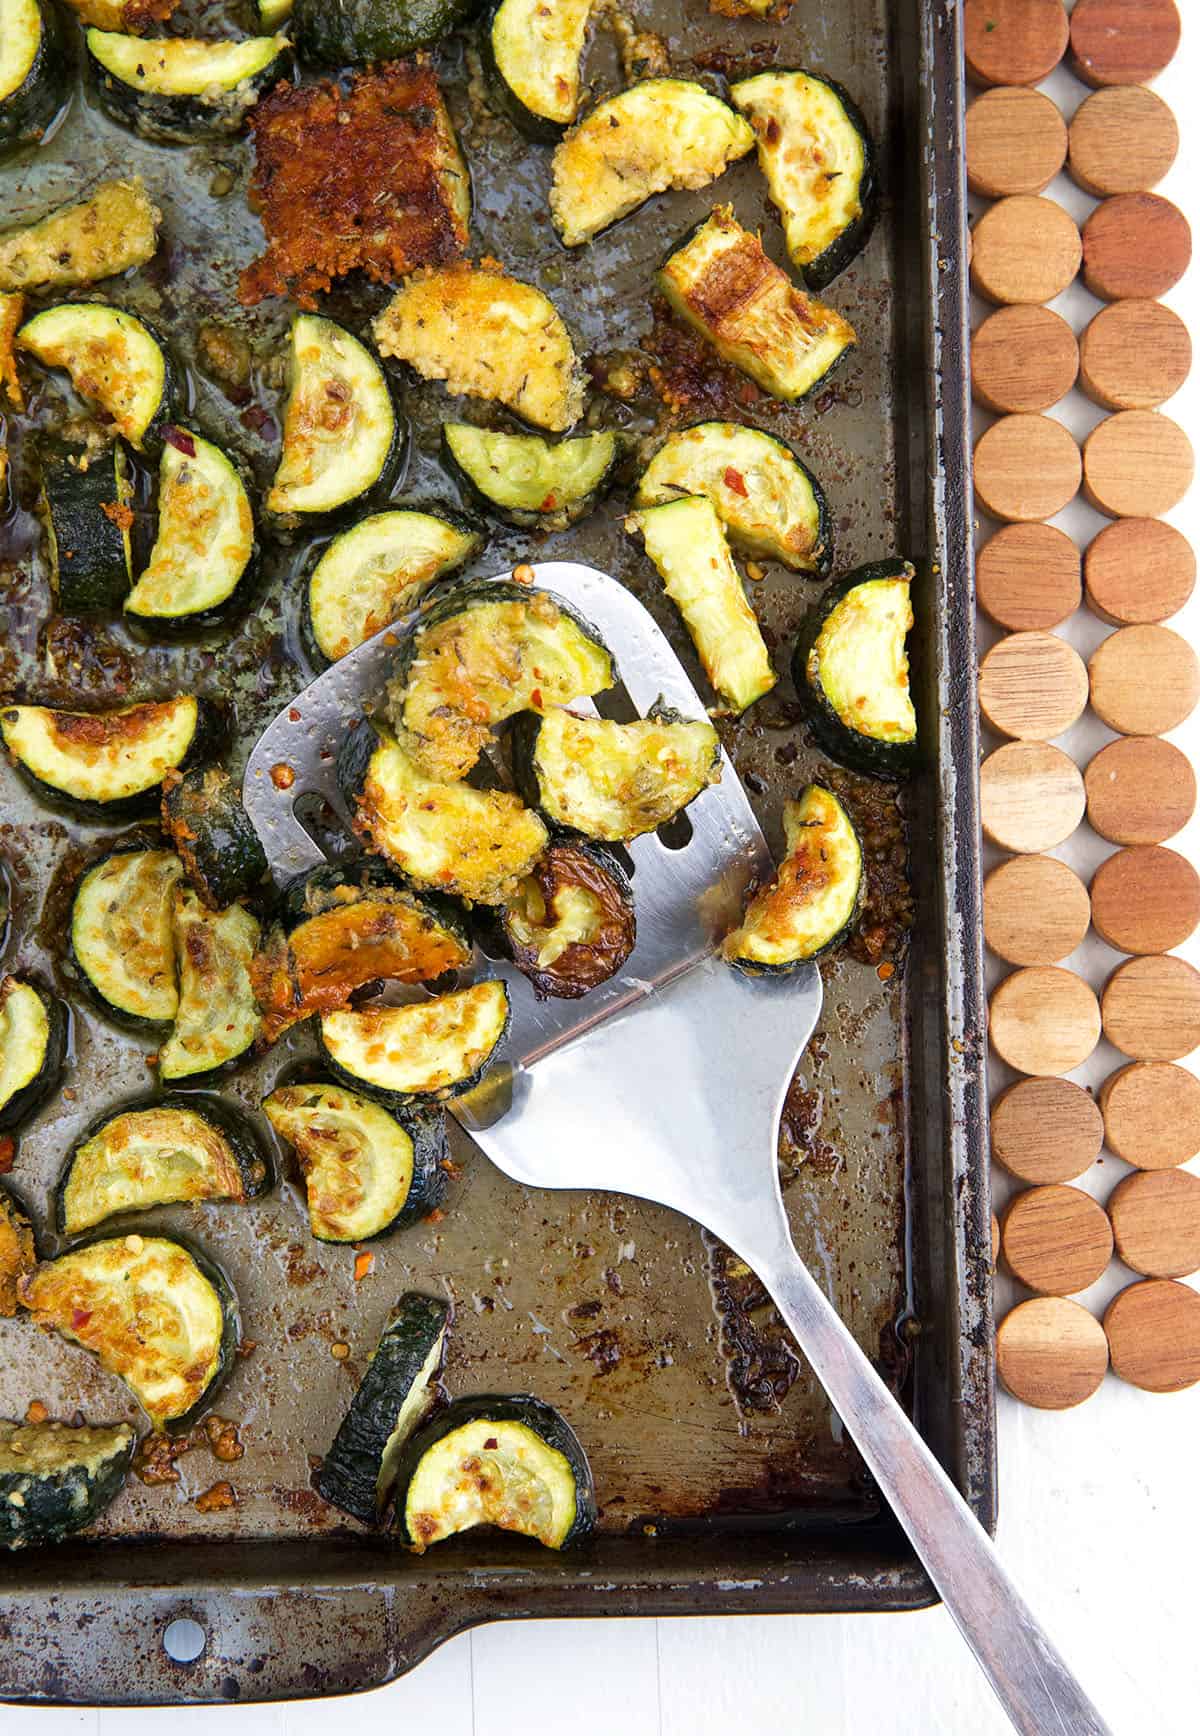 A spatula is lifting some roasted zucchini from a baking sheet.